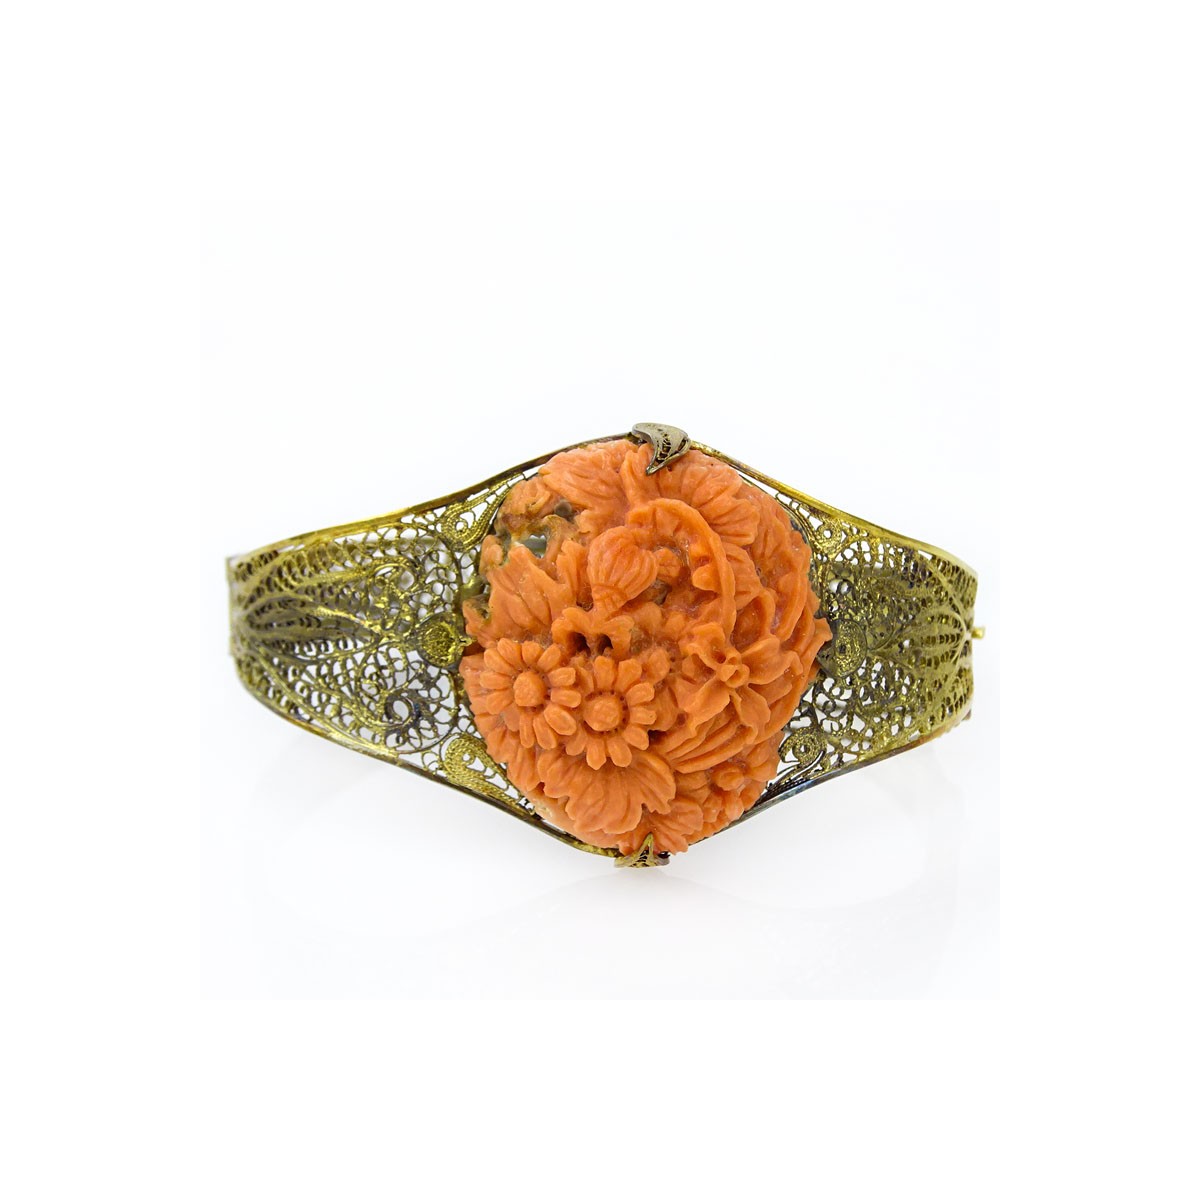 Antique Carved Red Coral and Silver Filigree Bangle Bracelet. Signed syx14K